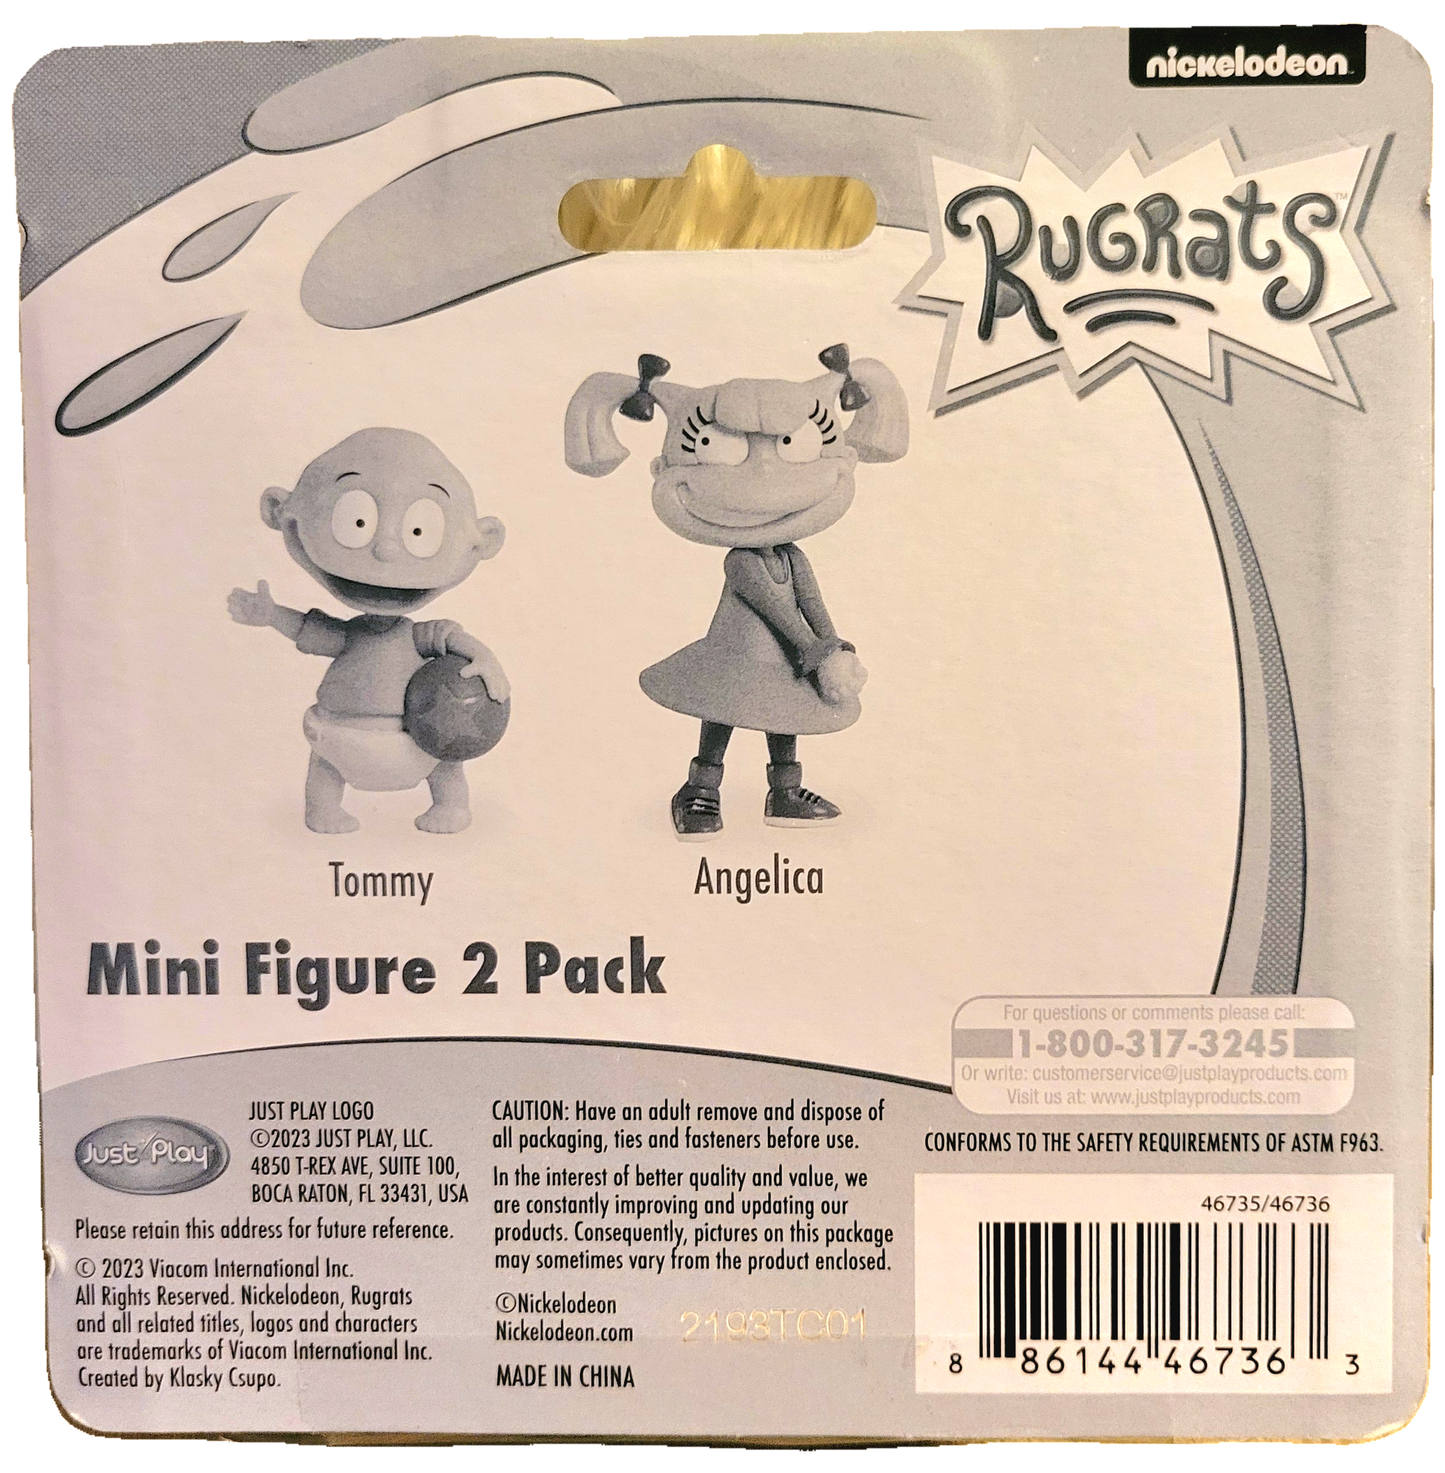 Just Play Nickelodeon Rugrats Tommy & Angelica Mini Figure 2-Pack